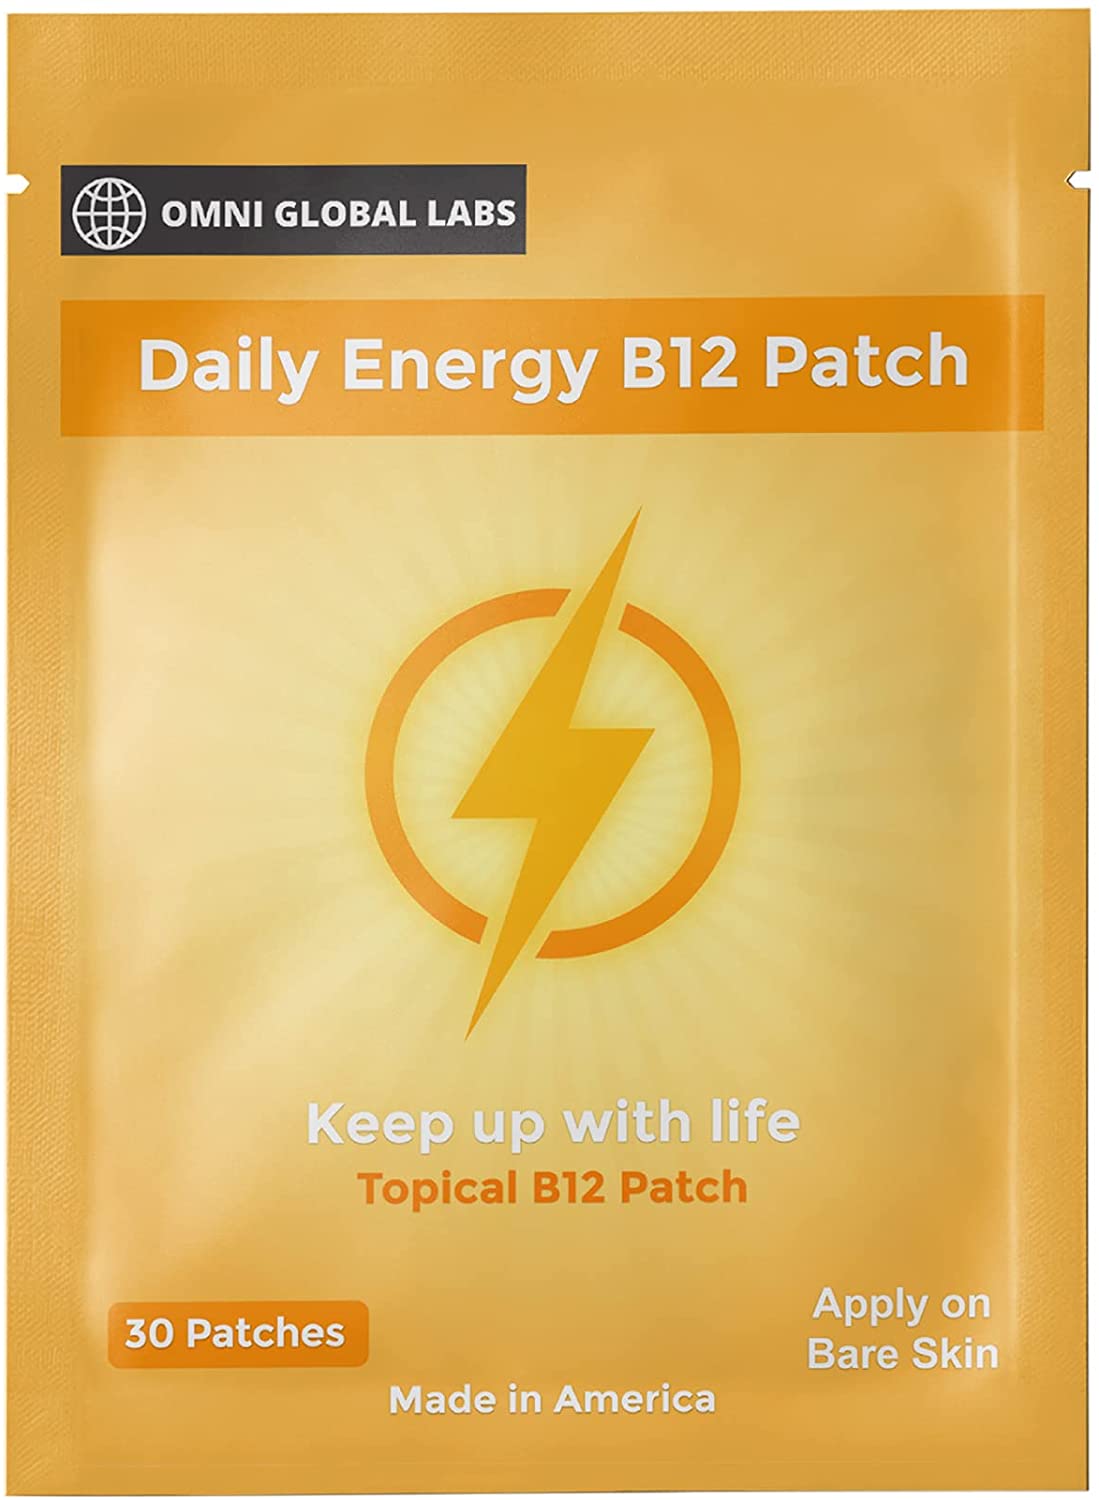 A pack of 30 daily energy B12 patches in orange packaging